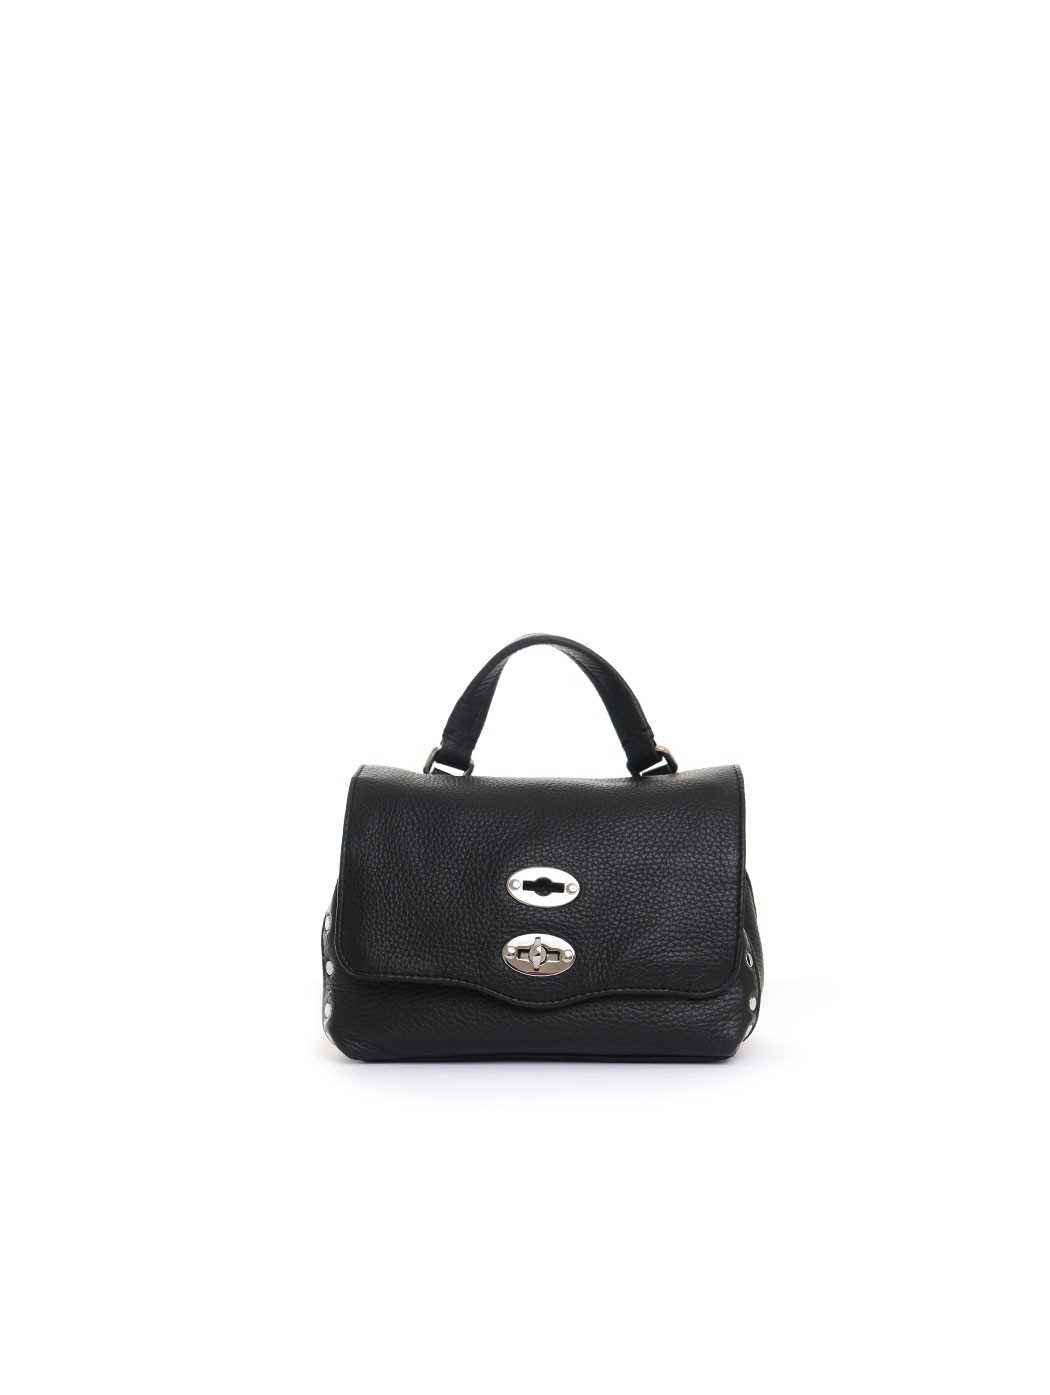  WOMAN BAGS,SPRING SUMMER COLLECTION,GIVENCHY BAGS,MARNI BAGS,LES PETITS JOUEURS BAGS  ZANELLATO 06262DG